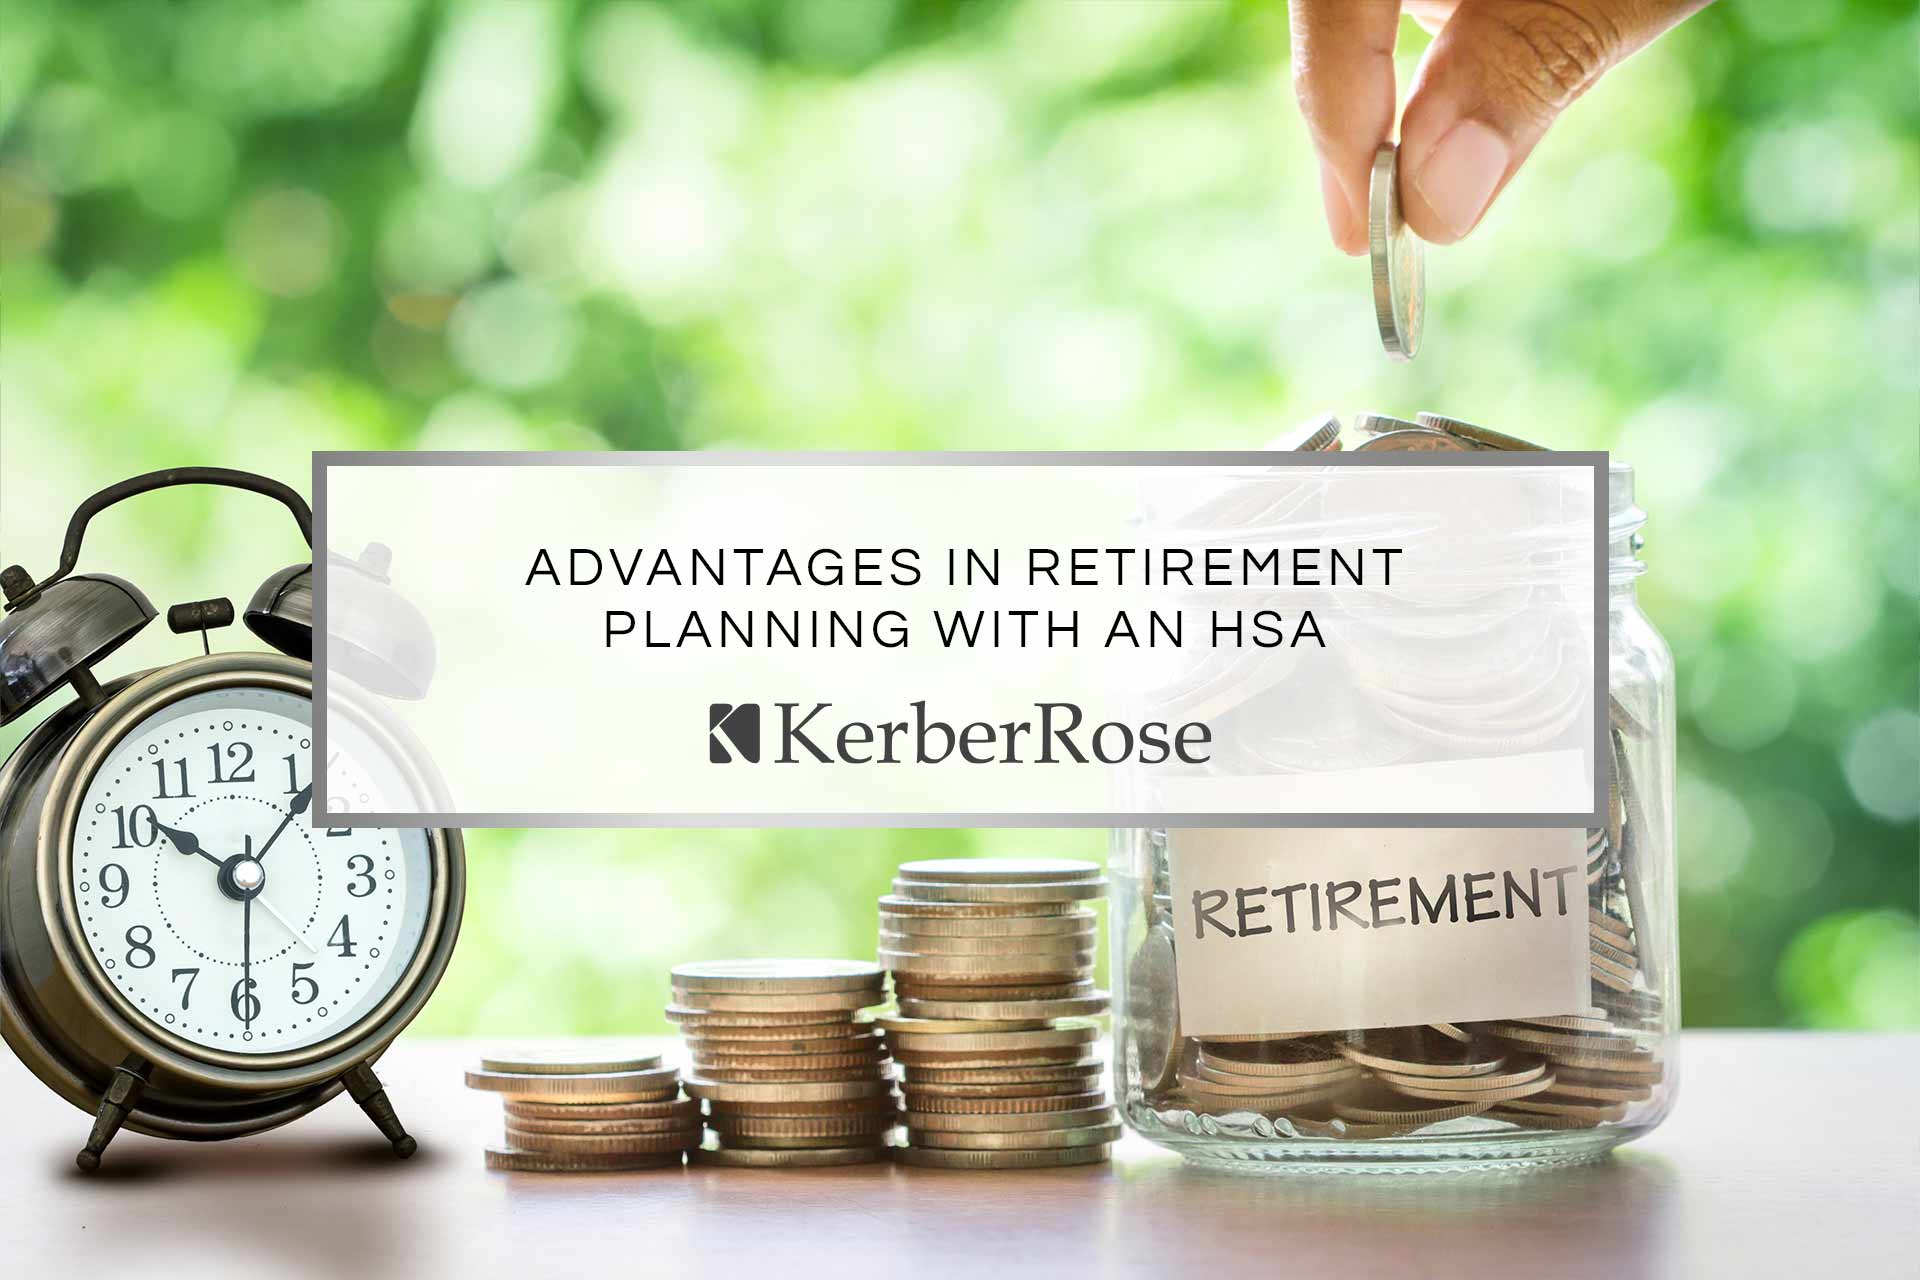 Advantages in Retirement Planning with an HSA